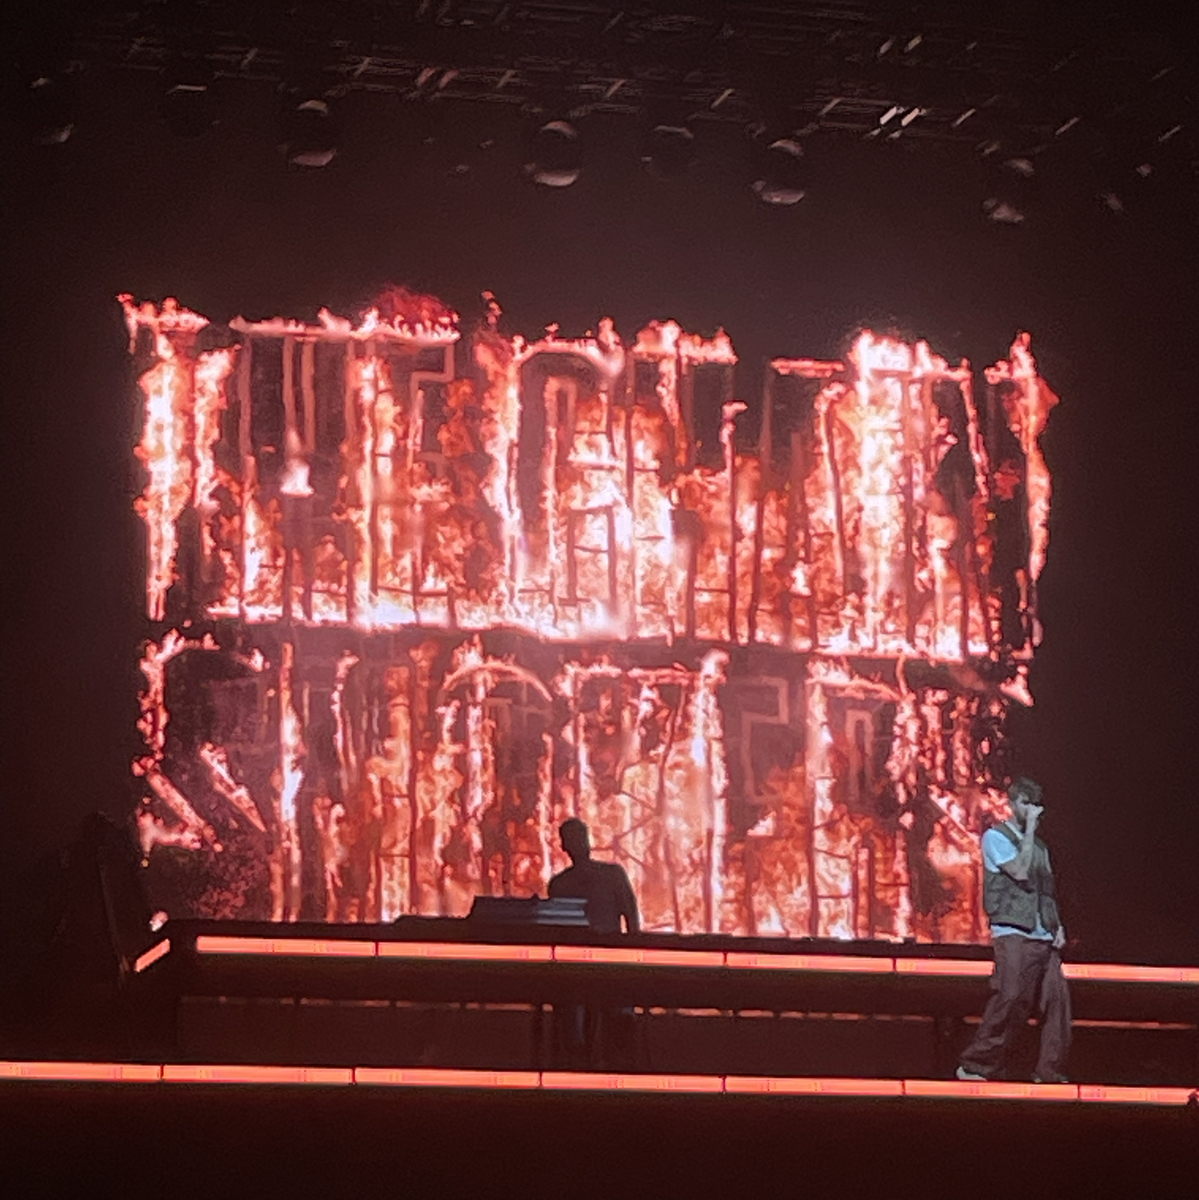 Nov 09, 2022: Chainsmokers at Ziggo Dome Amsterdam, North Holland,  Netherlands | Concert Archives